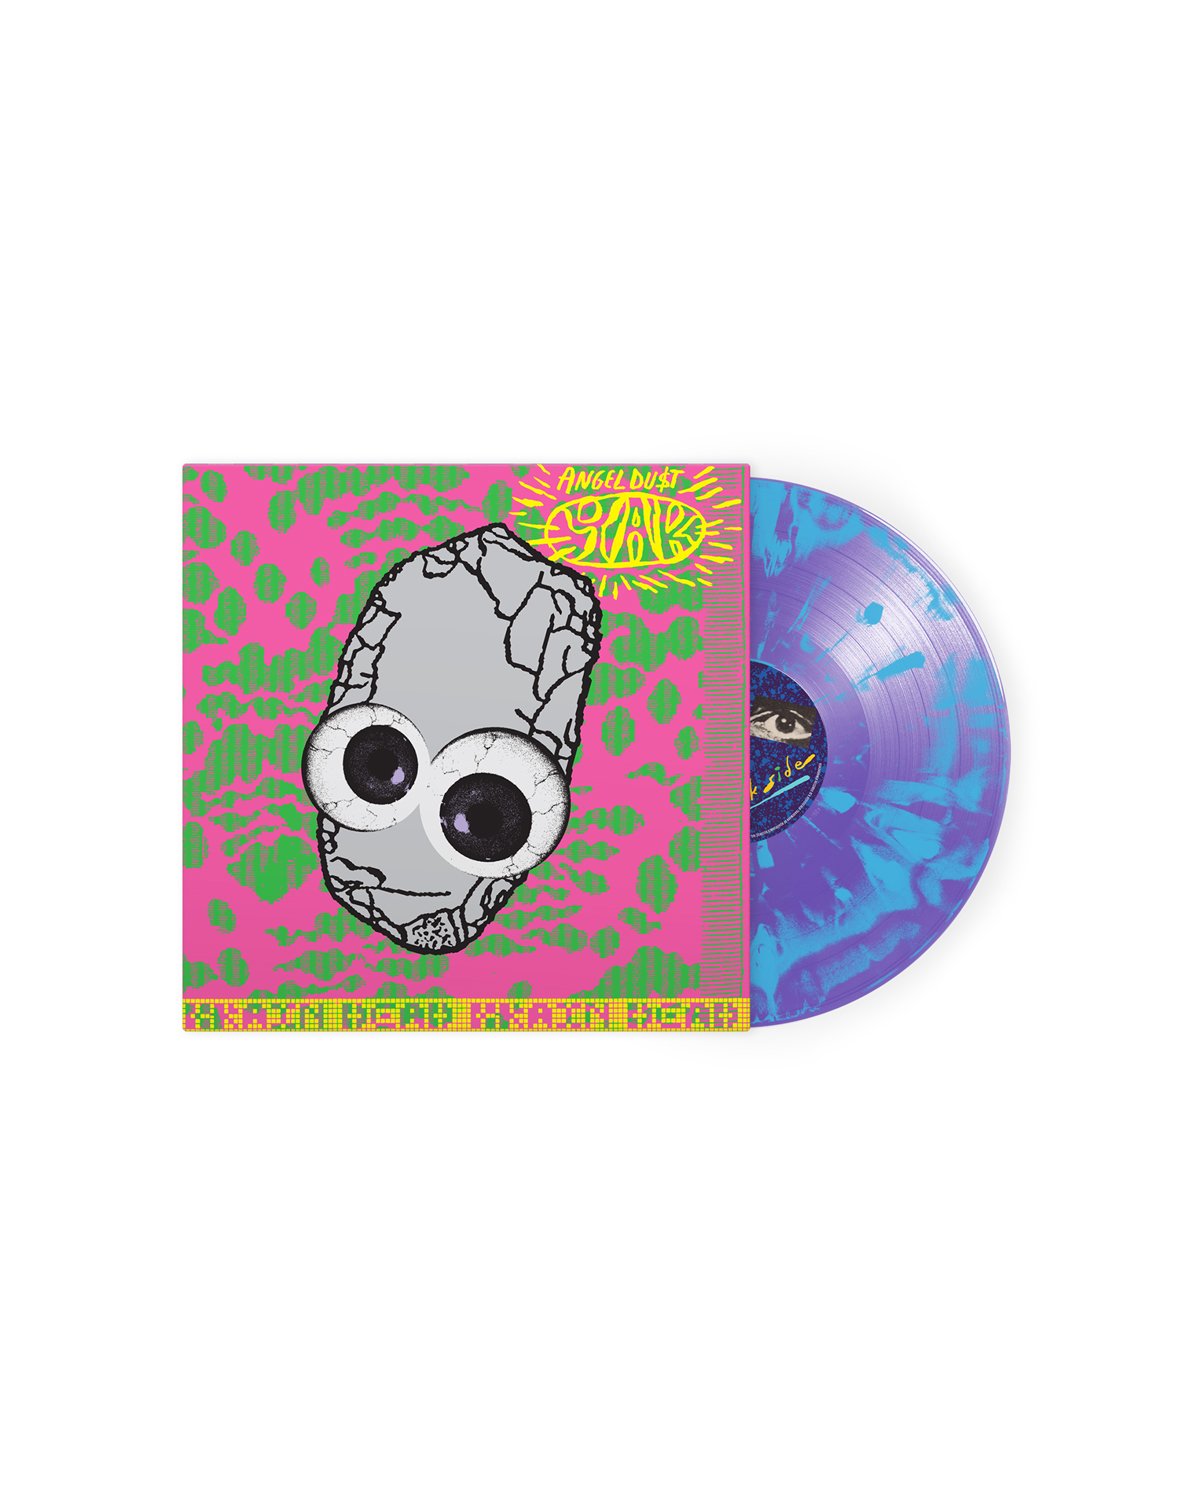 Angel Du$t "Yak: A Collection of Truck Songs" Limited Edition Vinyl Record PRE SALE  - Pink